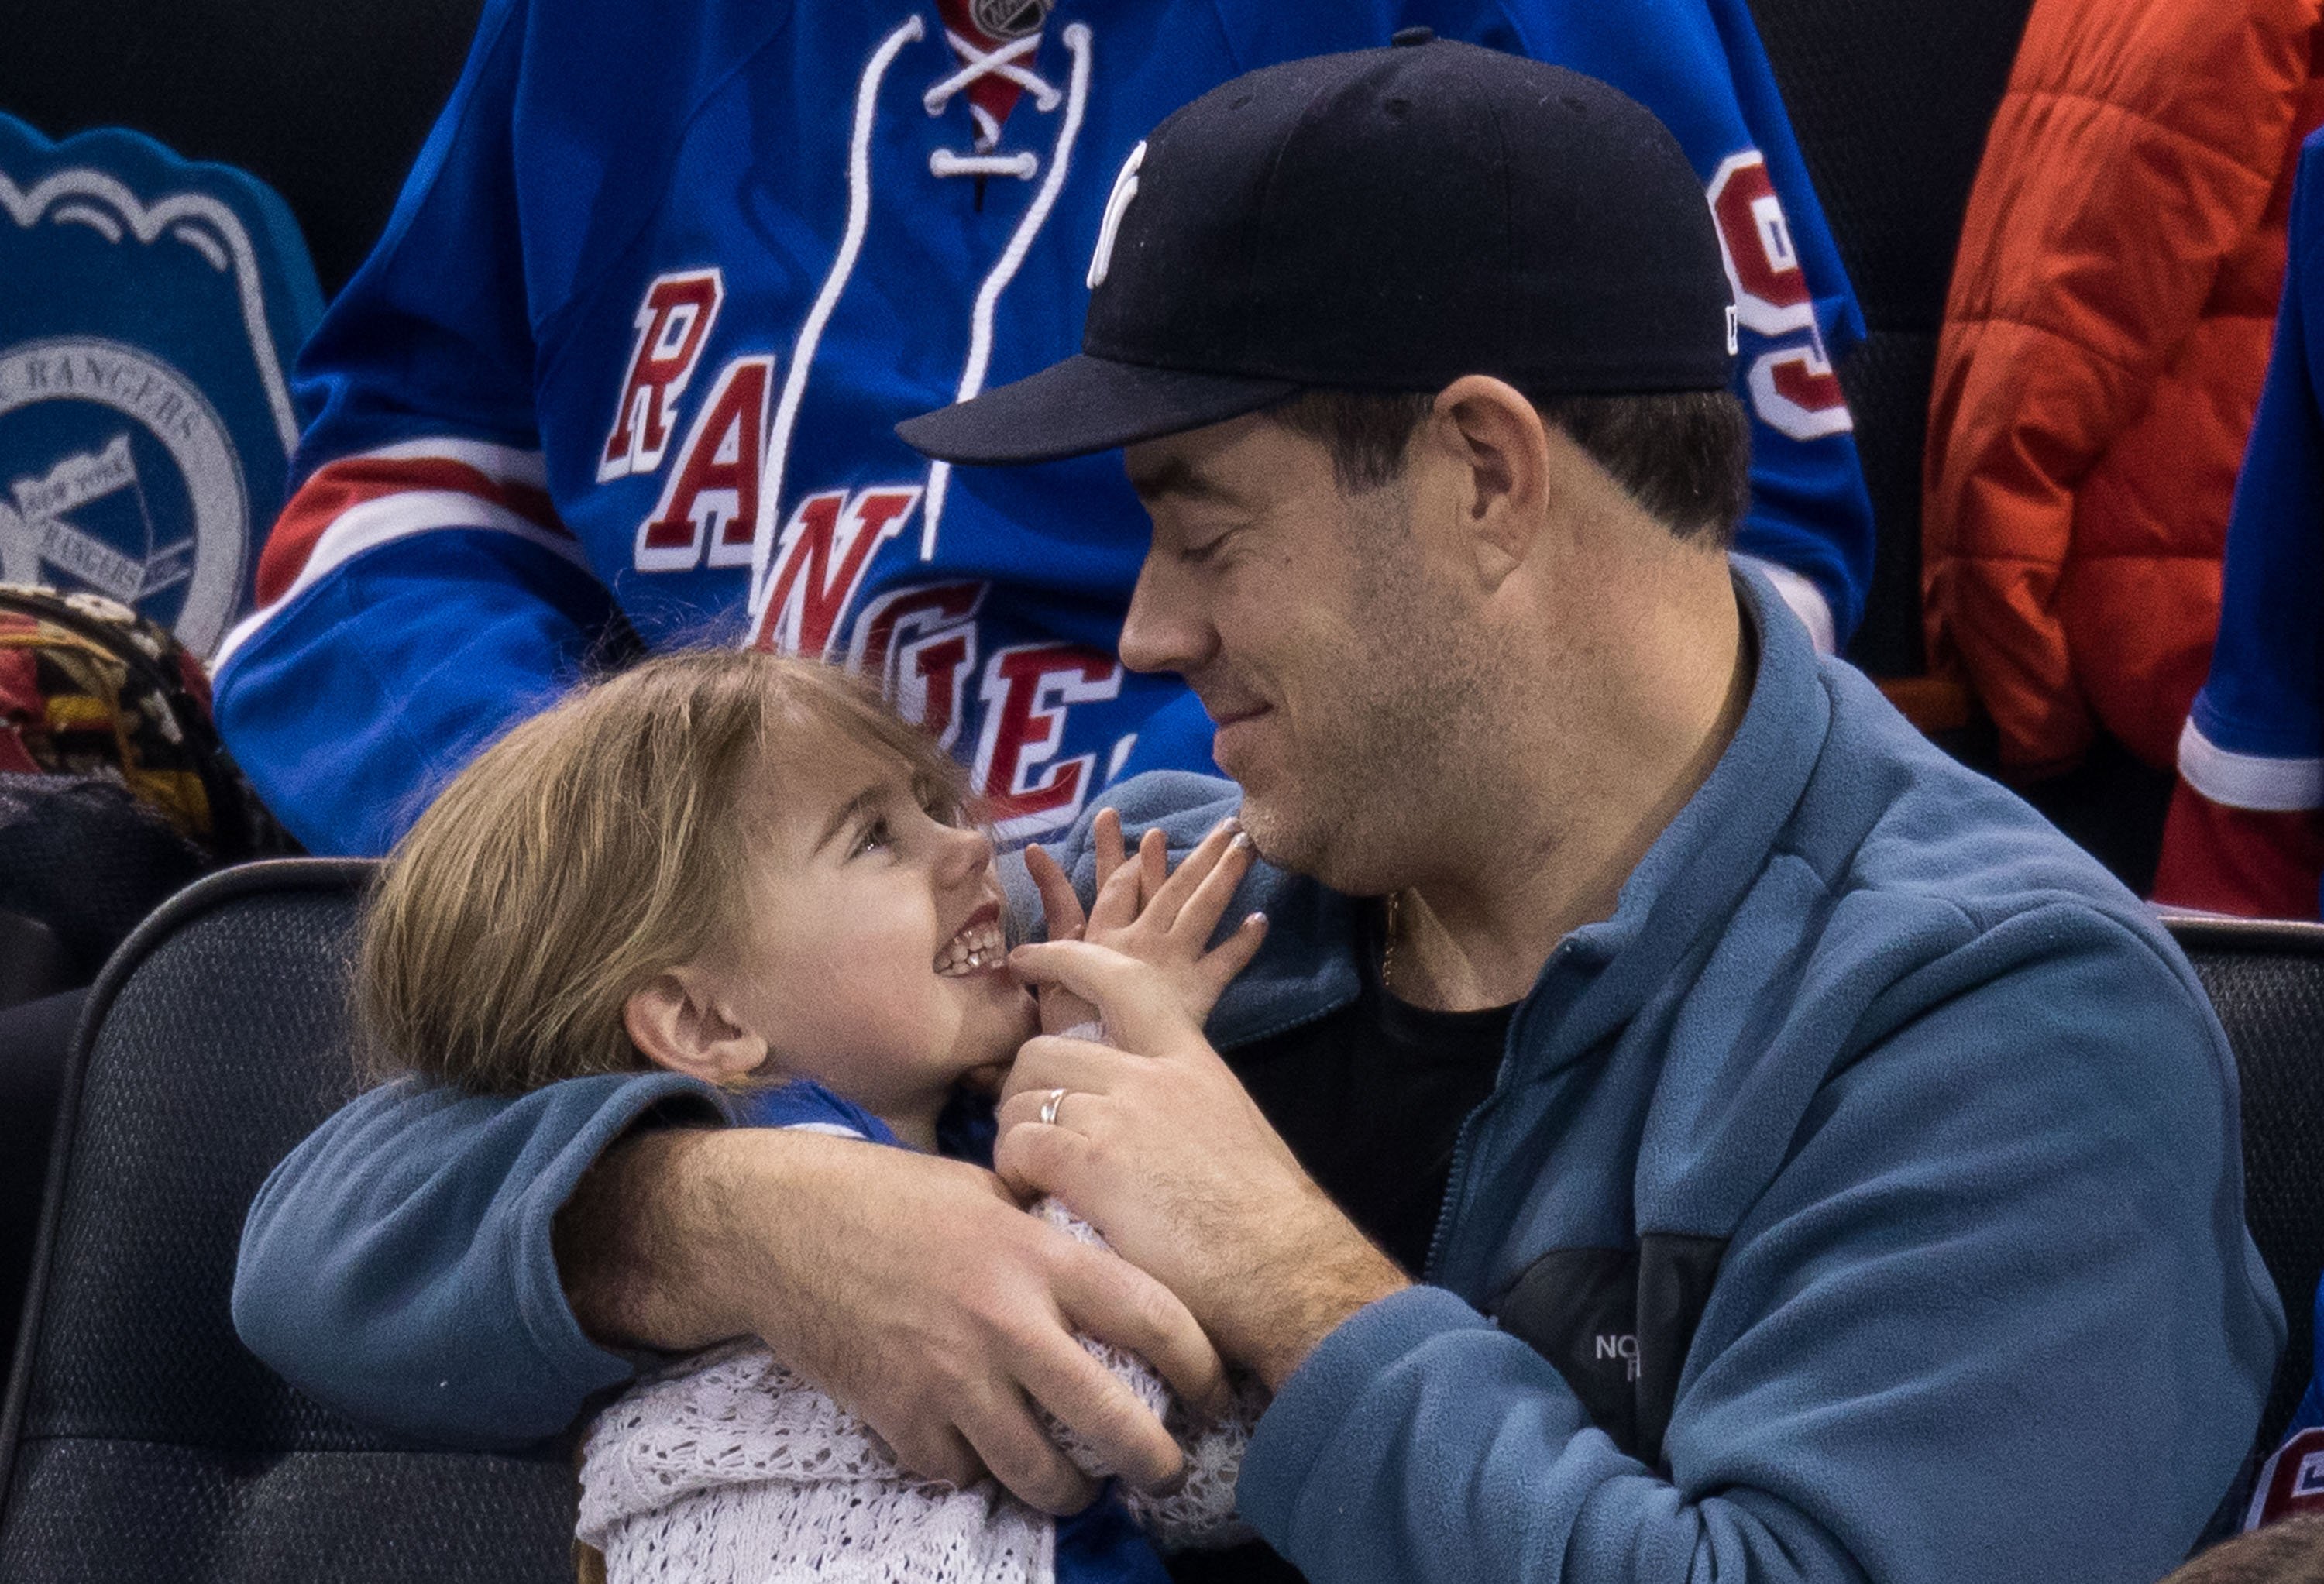 Carson Daly and Etta Daly at thePittsburgh Penguins Vs. New York Rangers game in 2017 in New York City. | Source: Getty Images